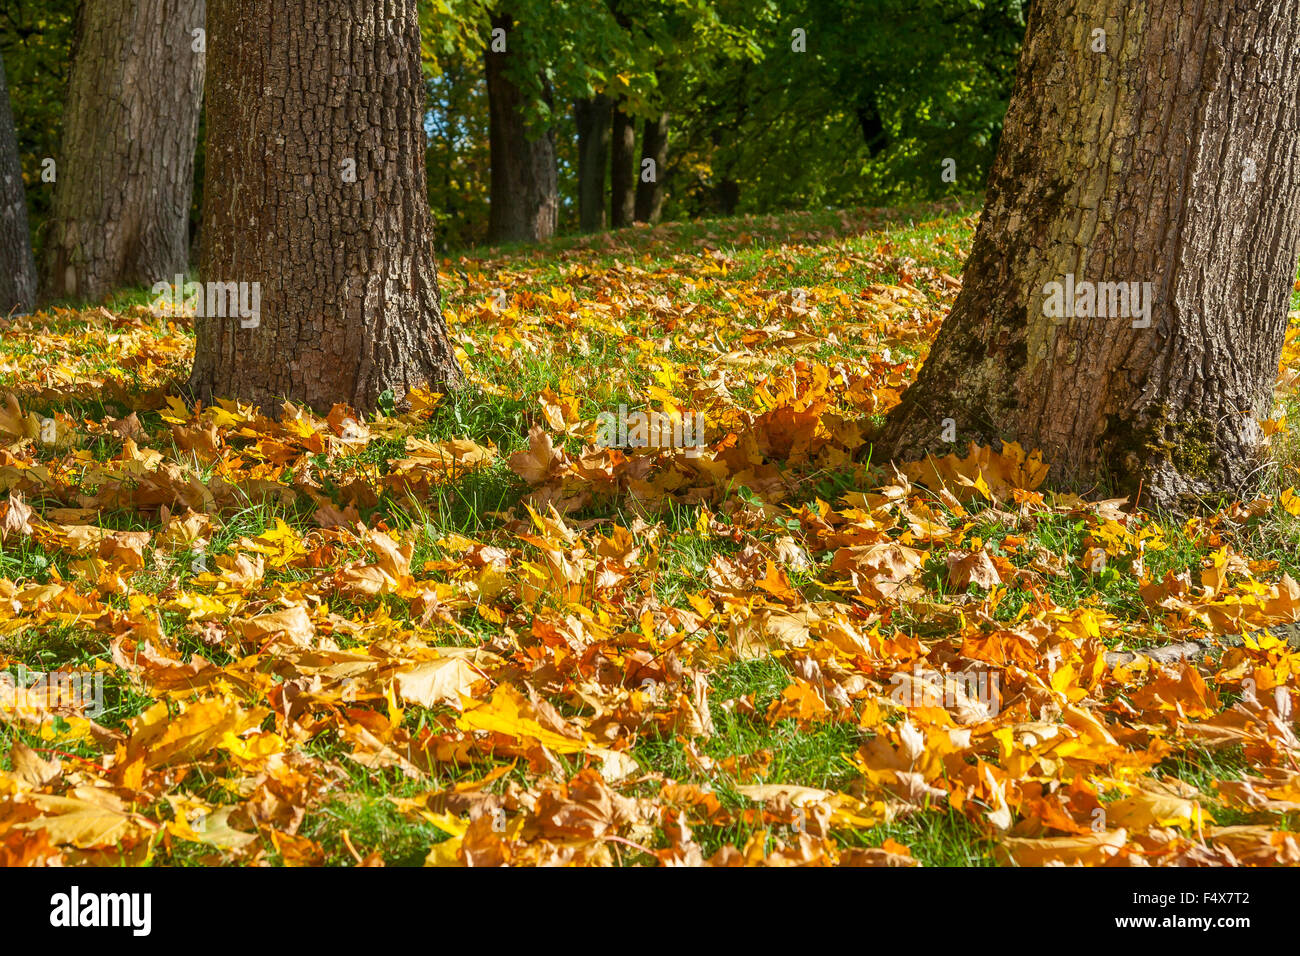 Leaves Falling From An Autumn Trees Stock Photo